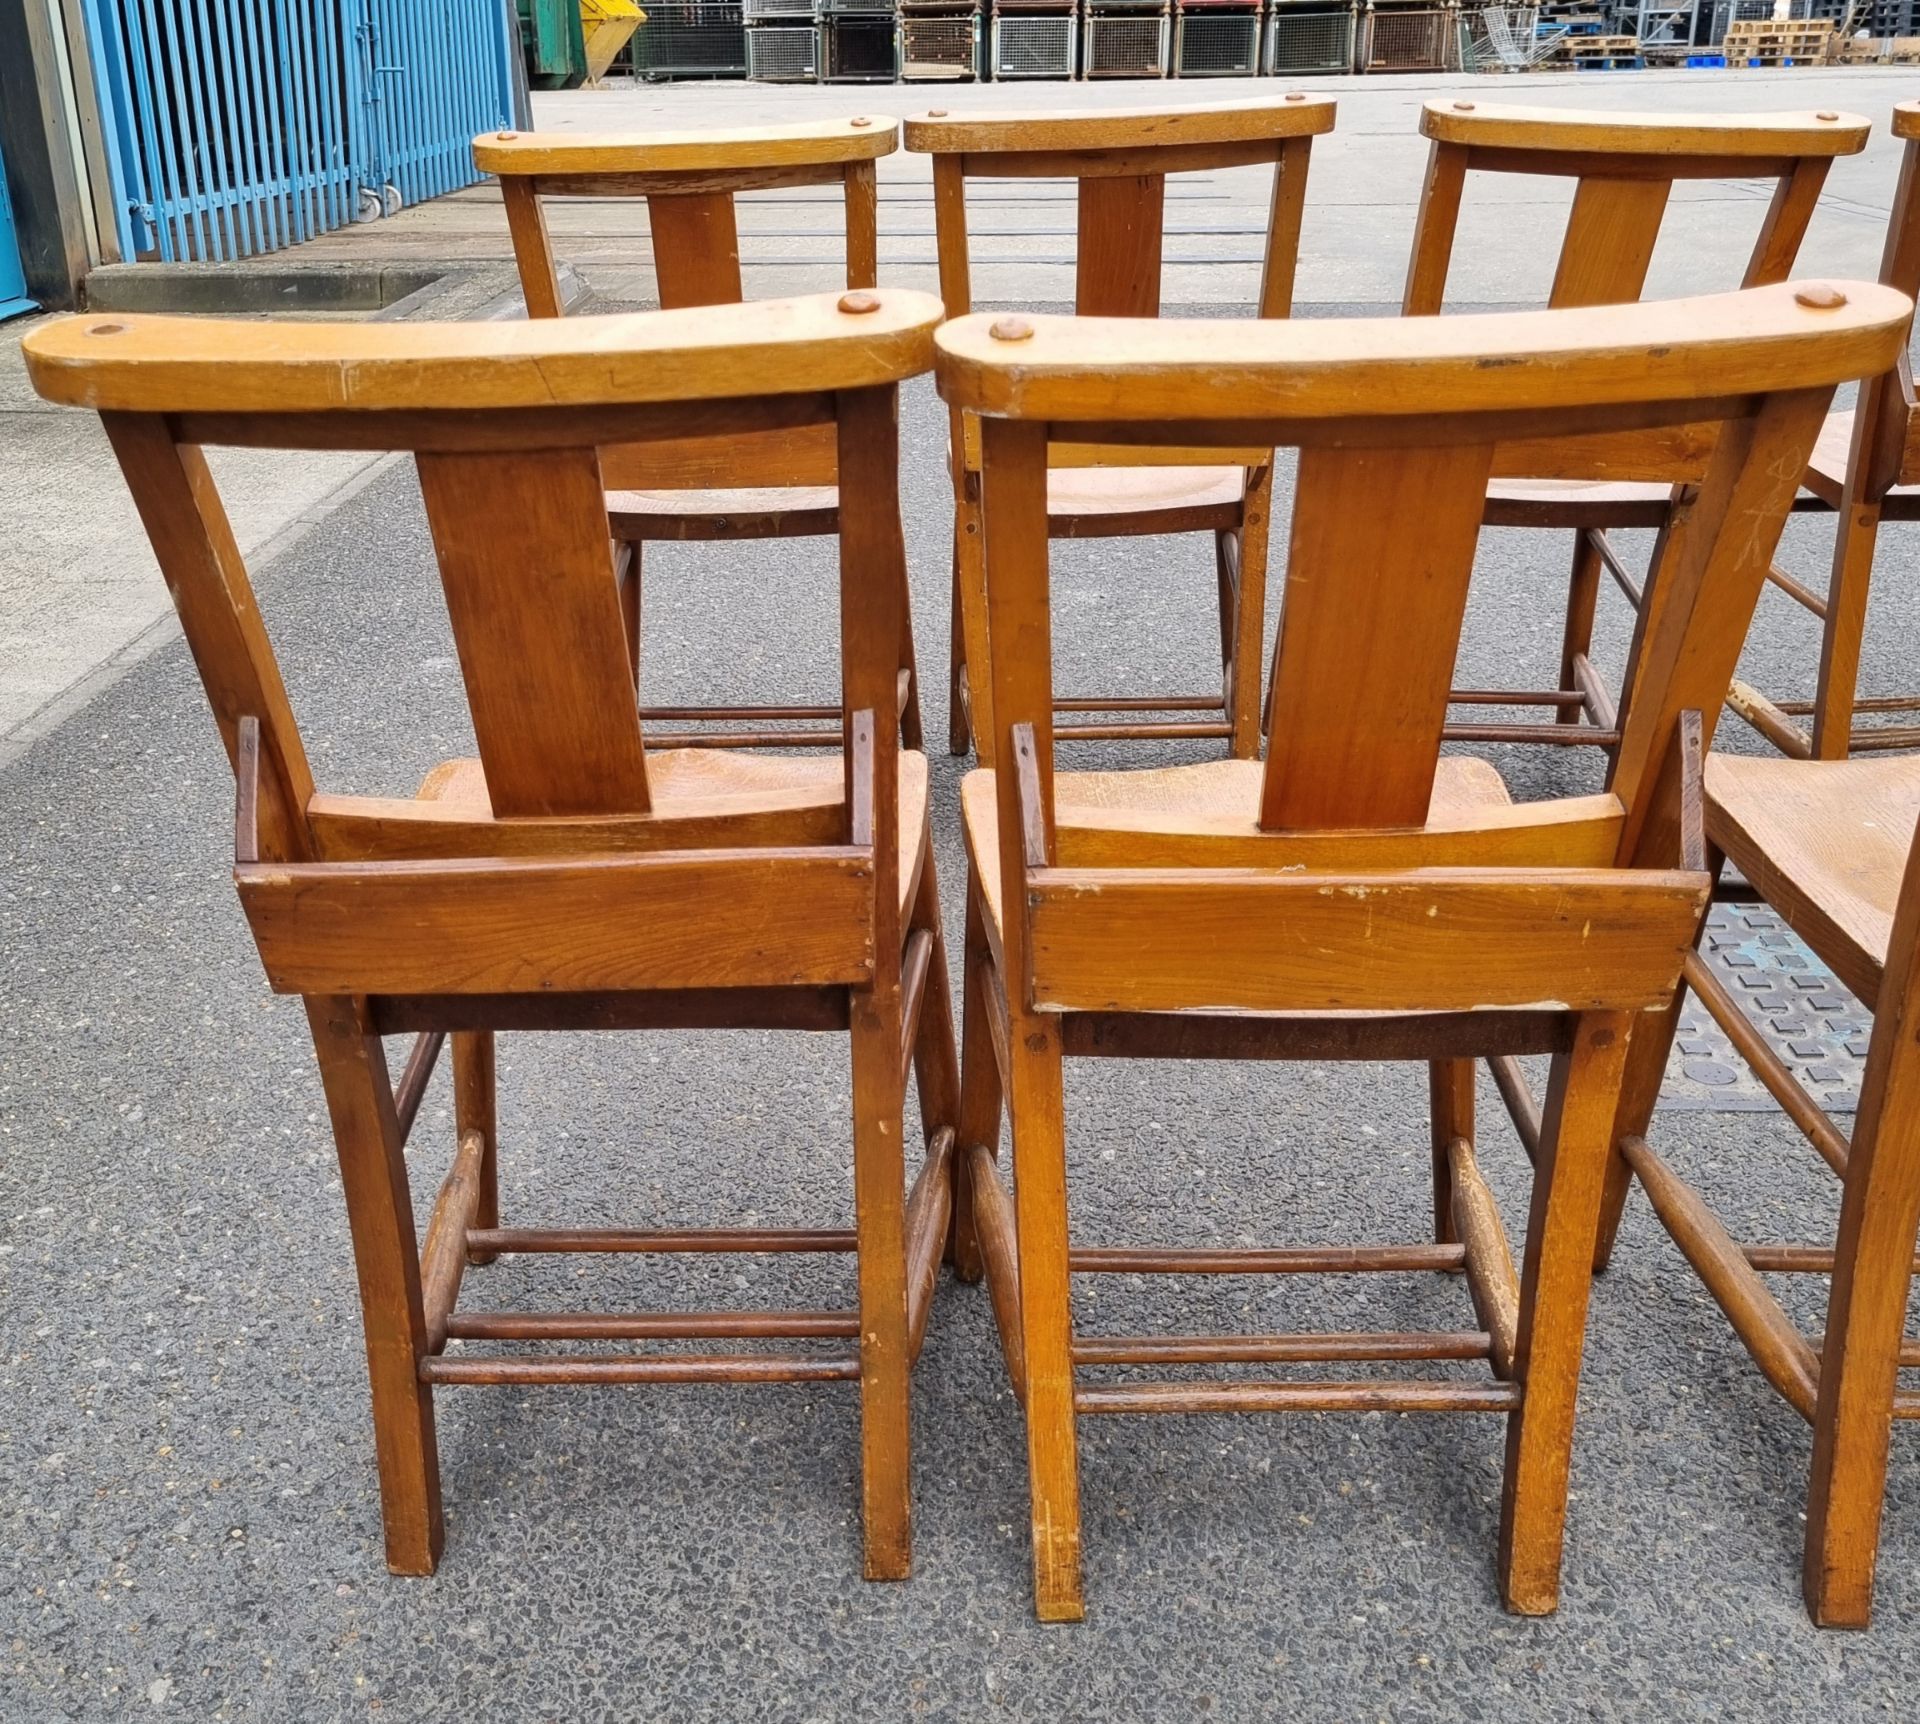 12x Wooden chairs with rear book holder - L 420 x W 420 x H 820mm - Image 4 of 10